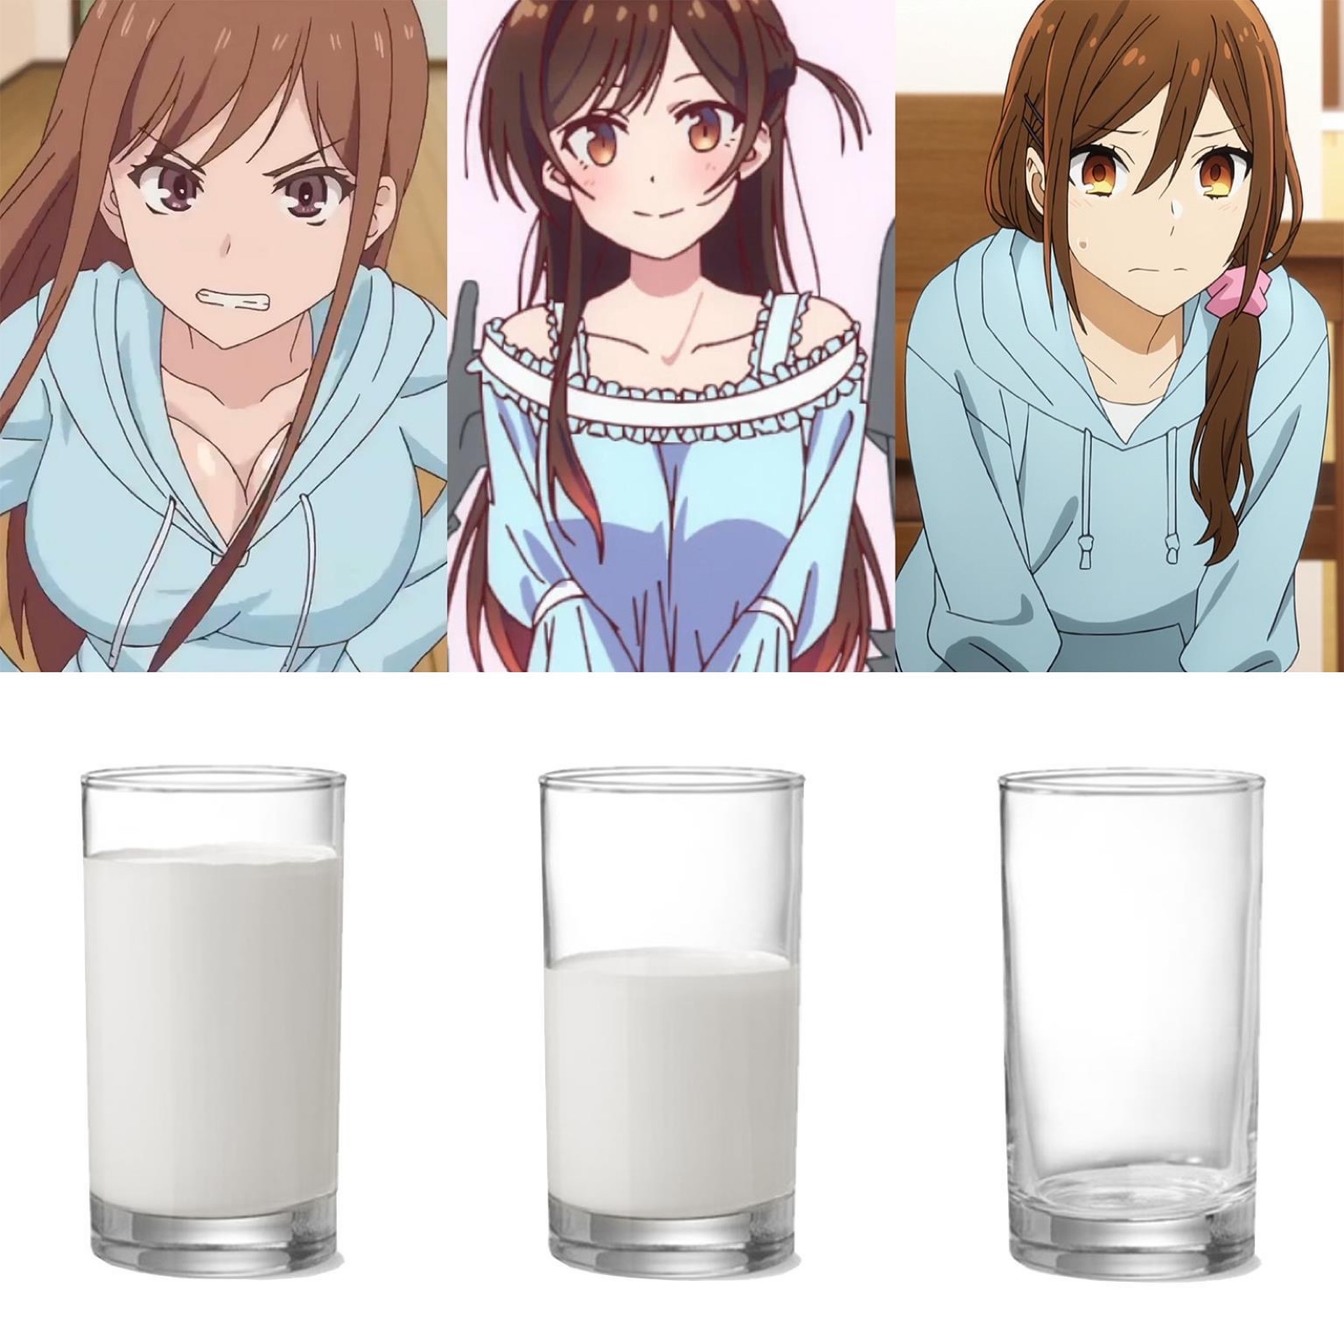 Anime Memes  on X: These glass of milk looks kinda sus   ANIME MEMES ~ These glass of milk looks kinda sus  please check out my videos! and subscribe #animemes   /